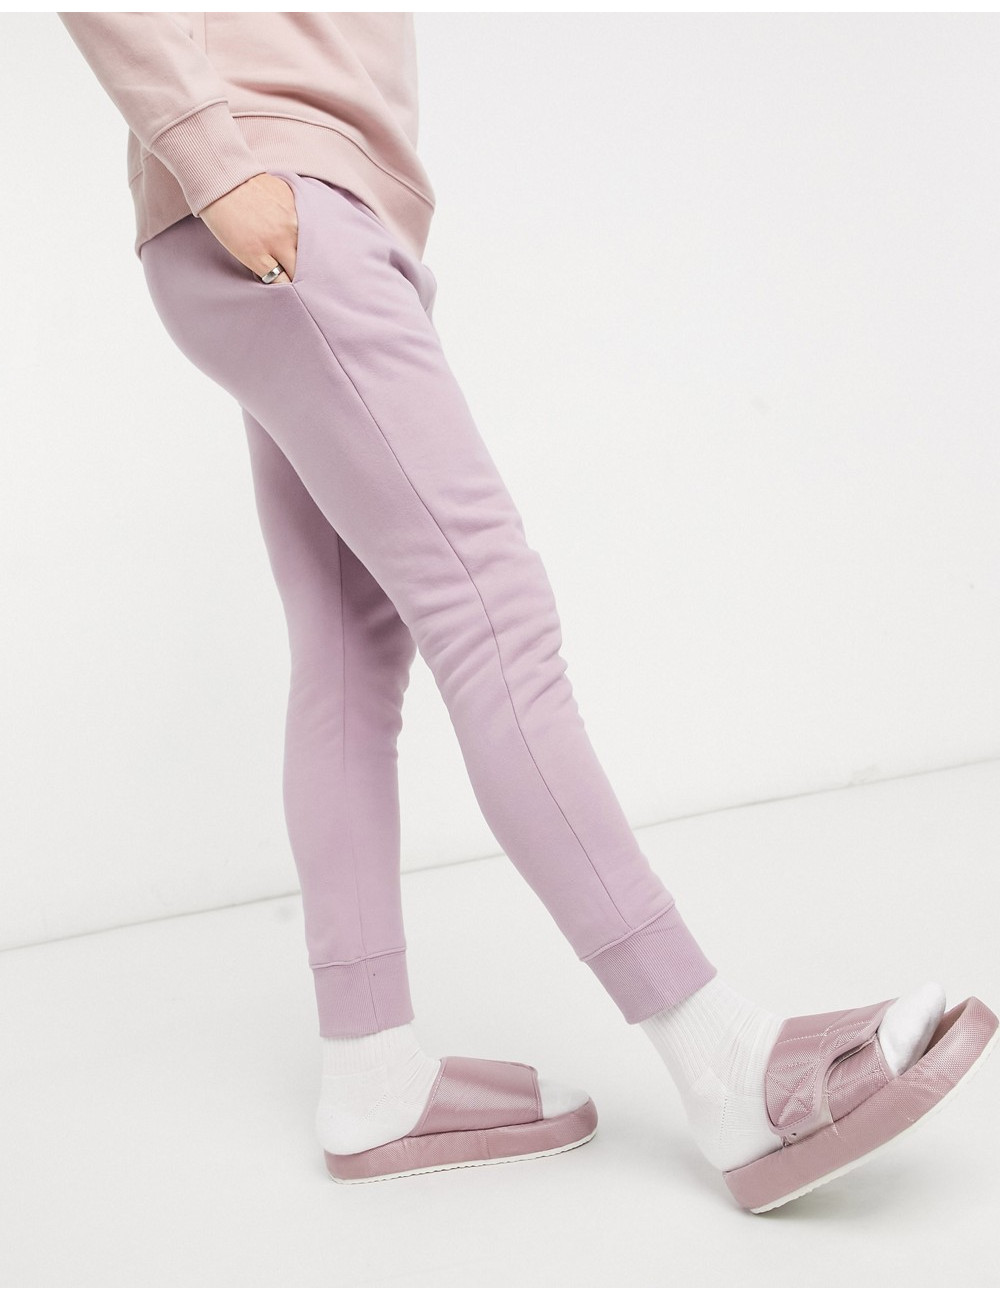 Topman co-ord joggers in lilac